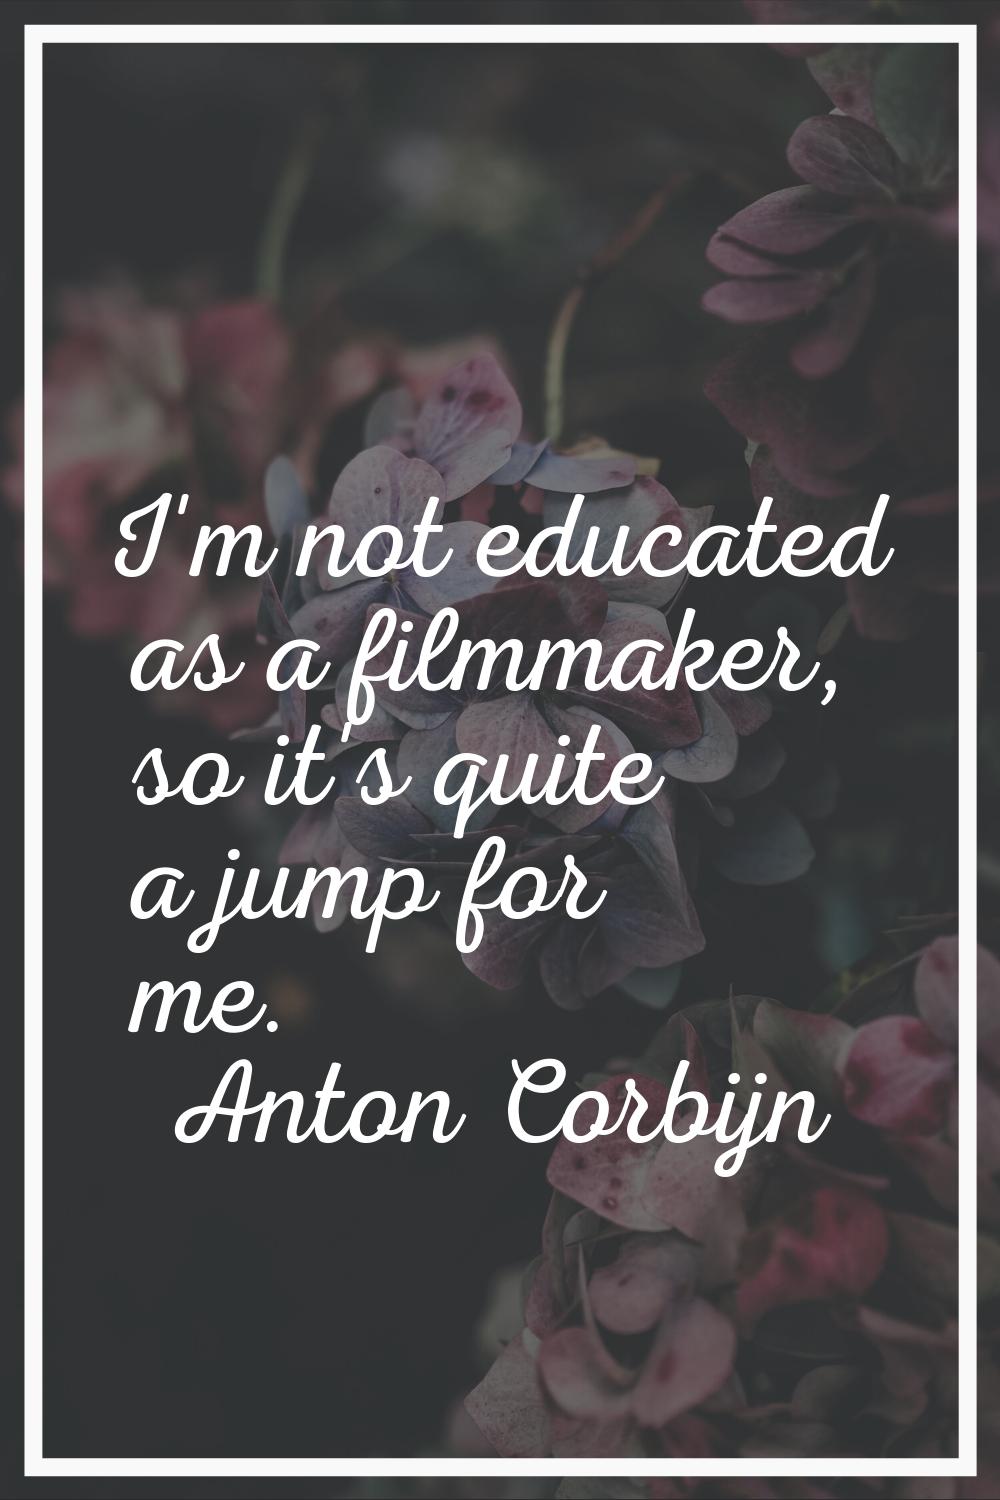 I'm not educated as a filmmaker, so it's quite a jump for me.